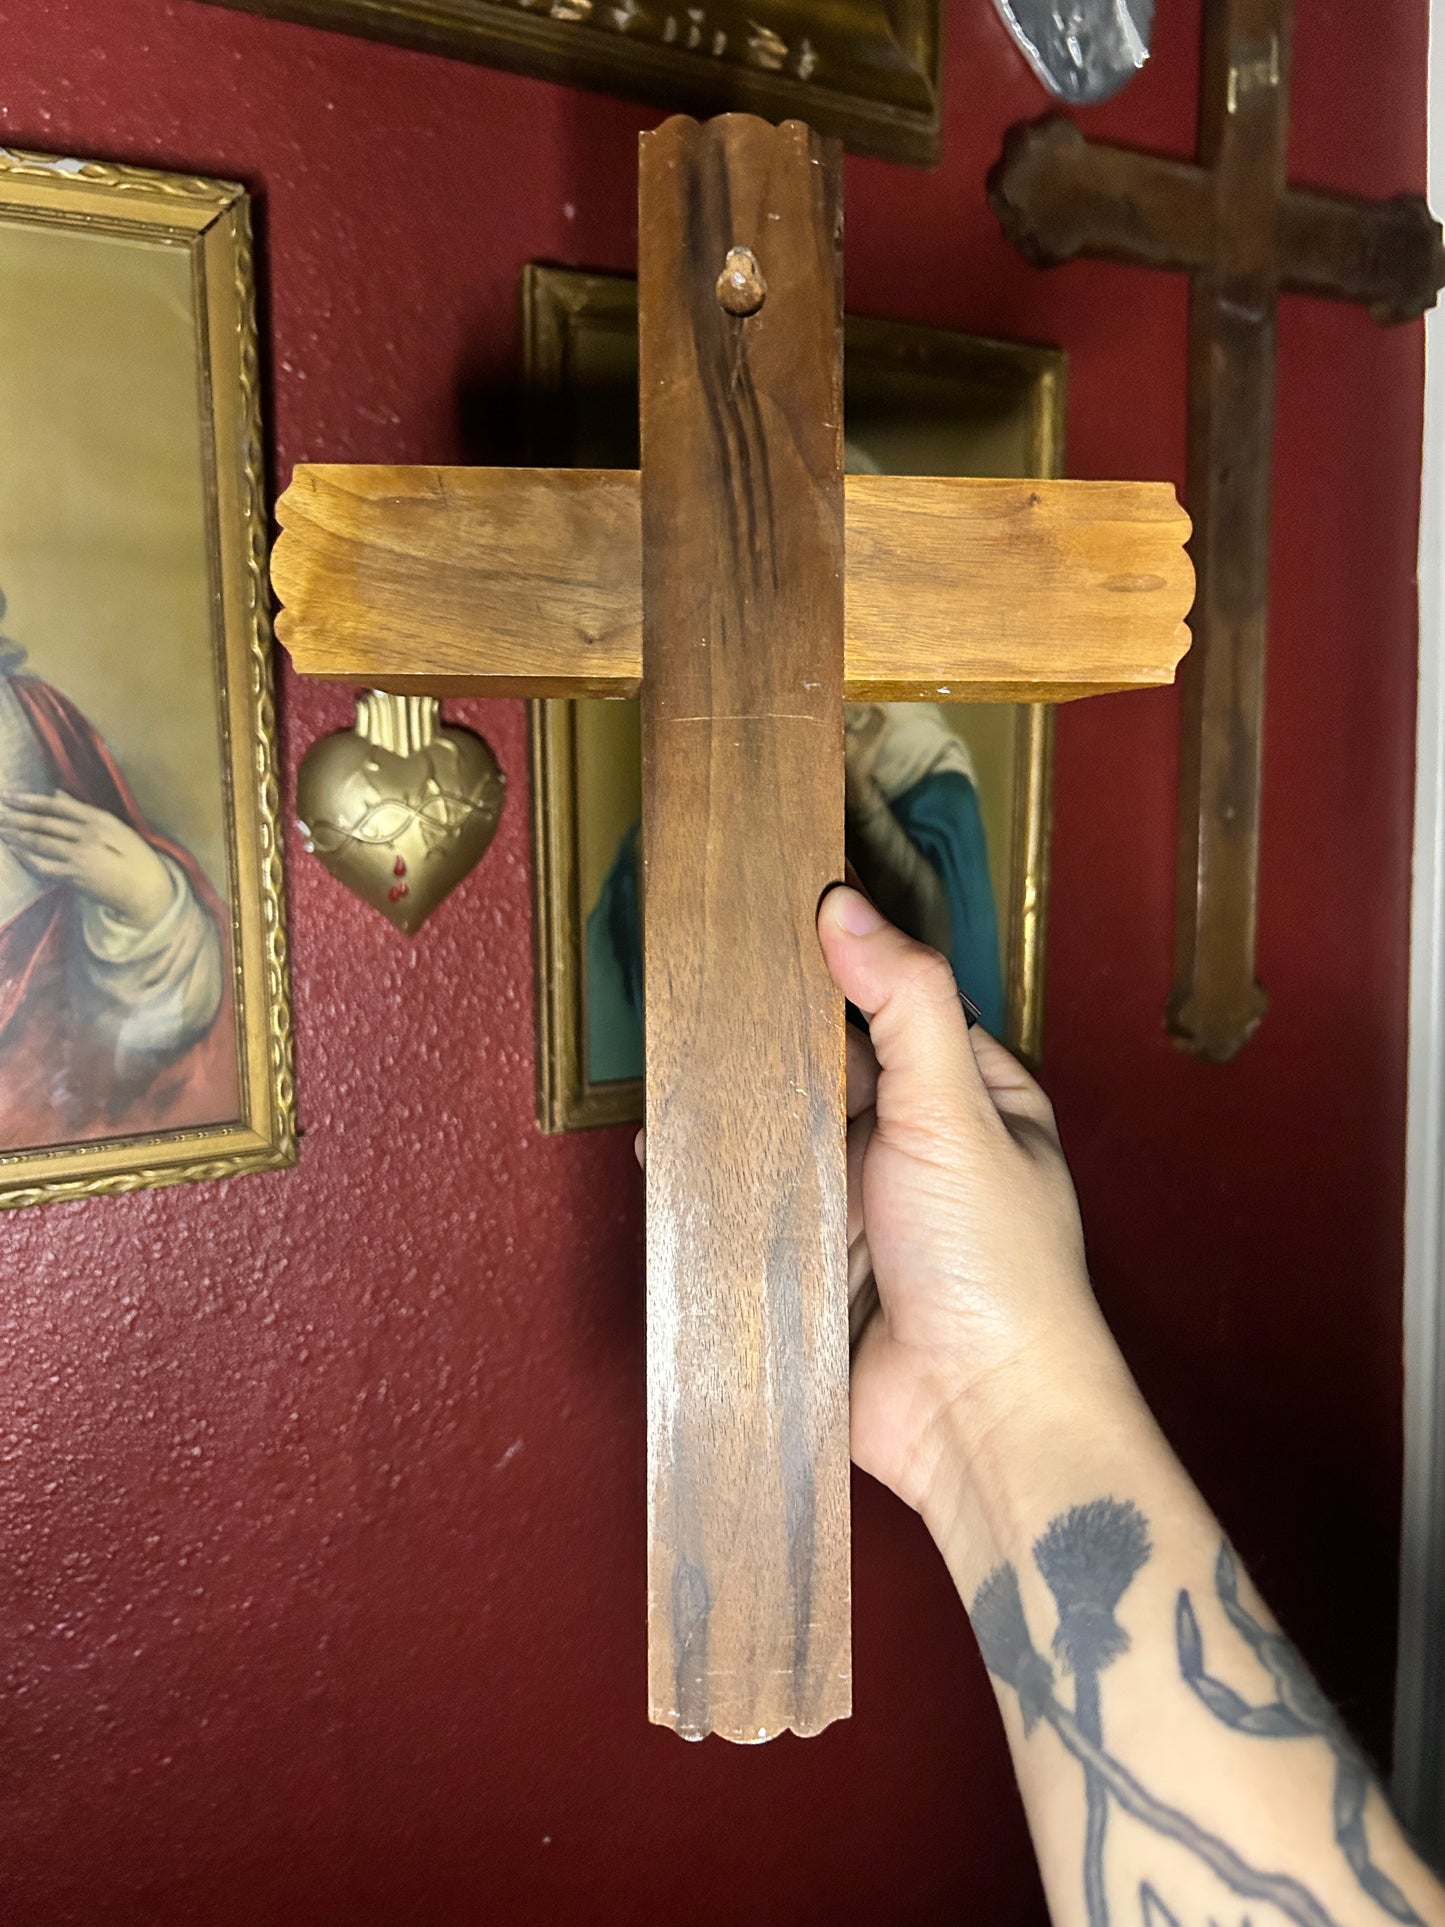 Last Rites Crucifix Never Been Used